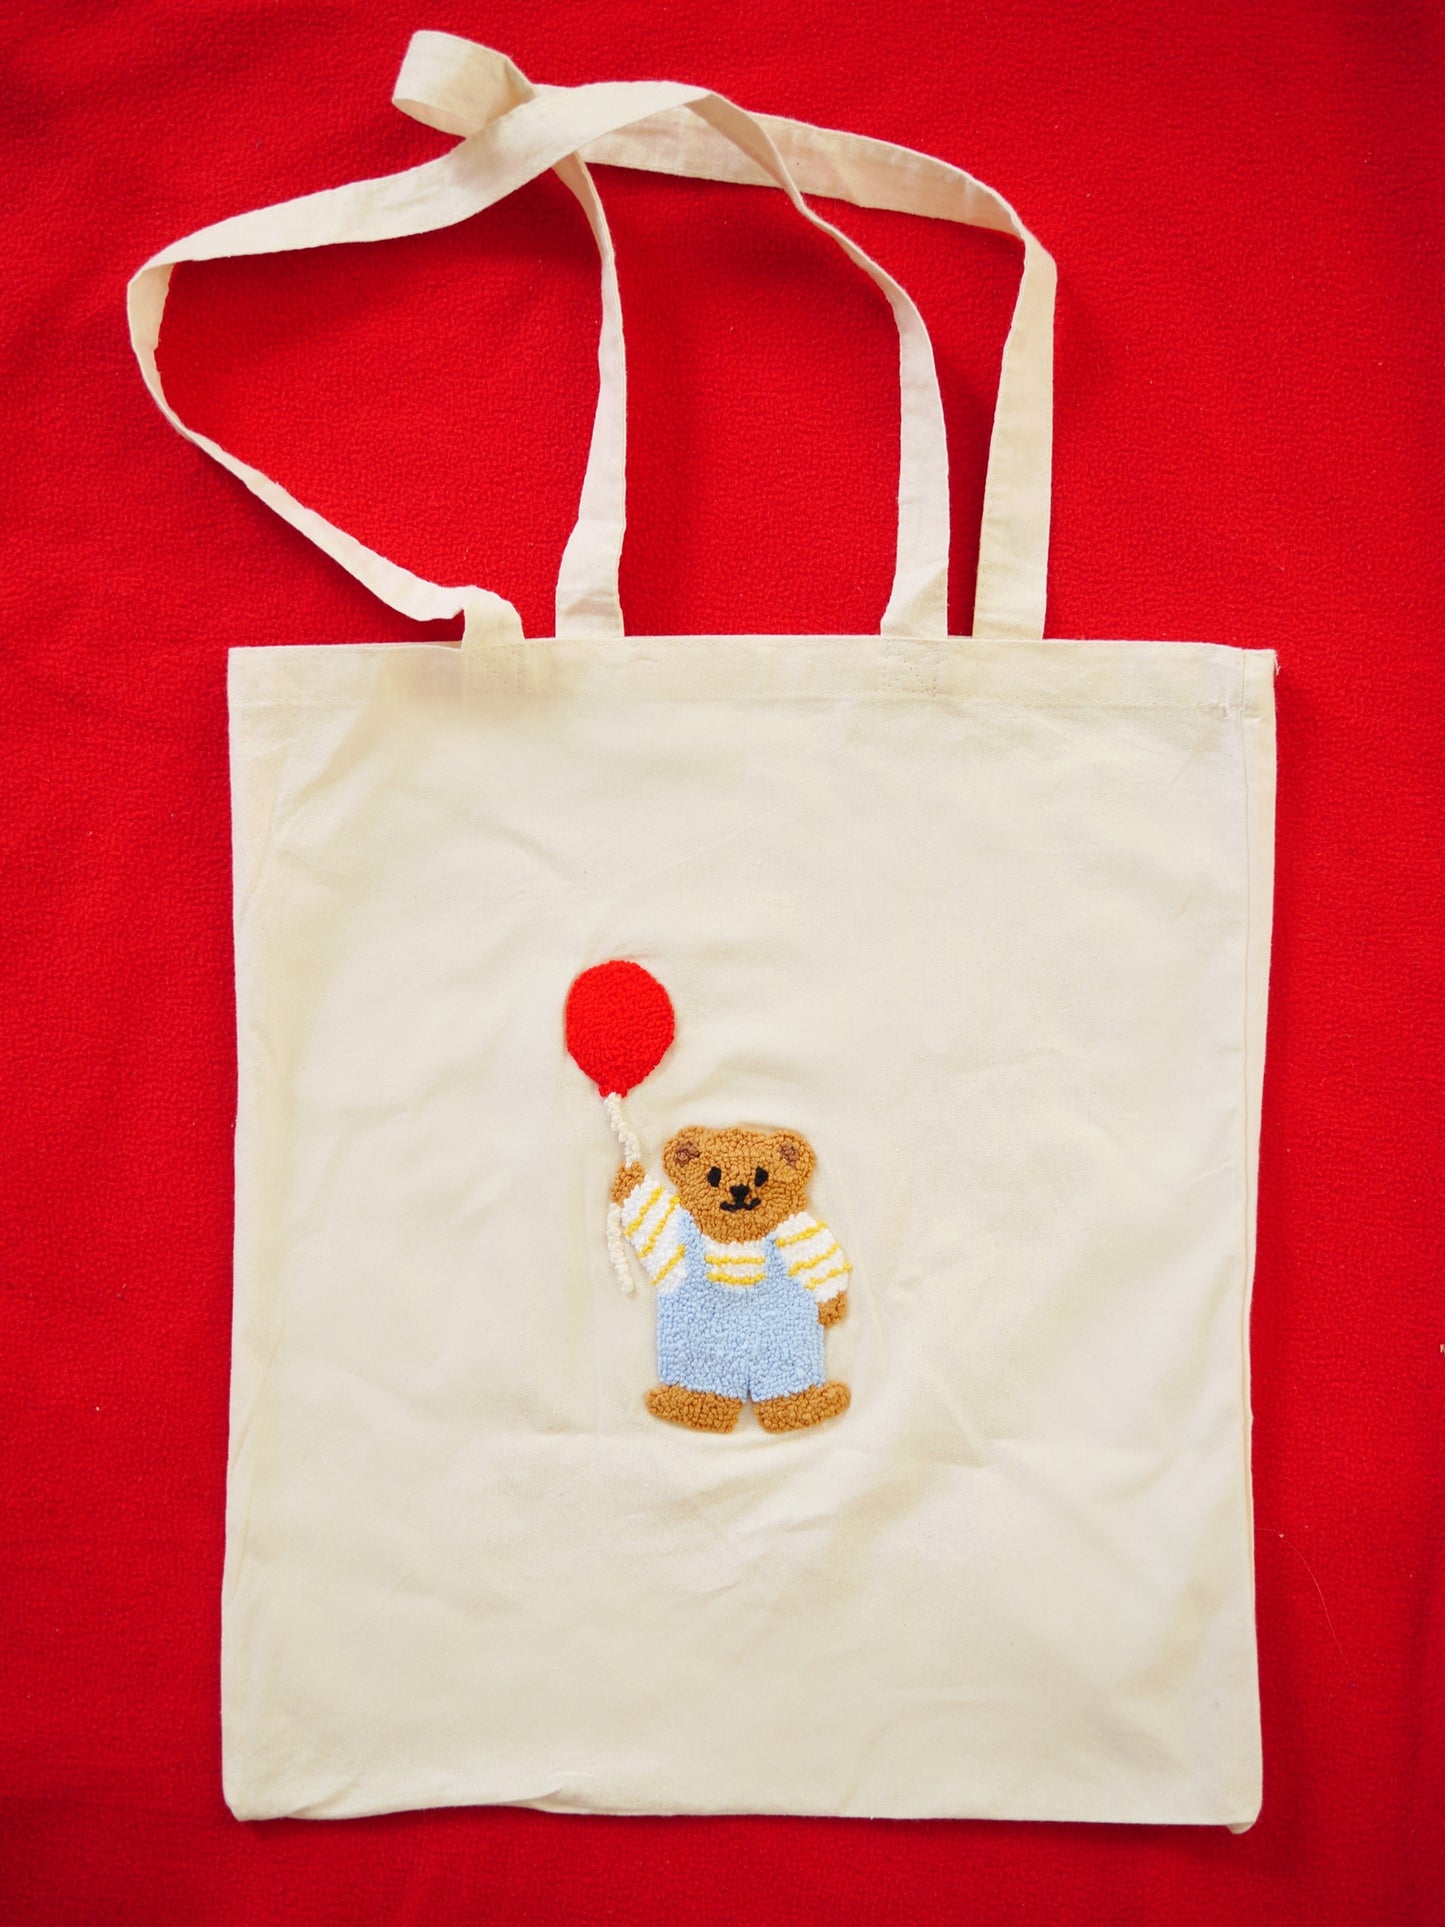 The Red Balloon Tote